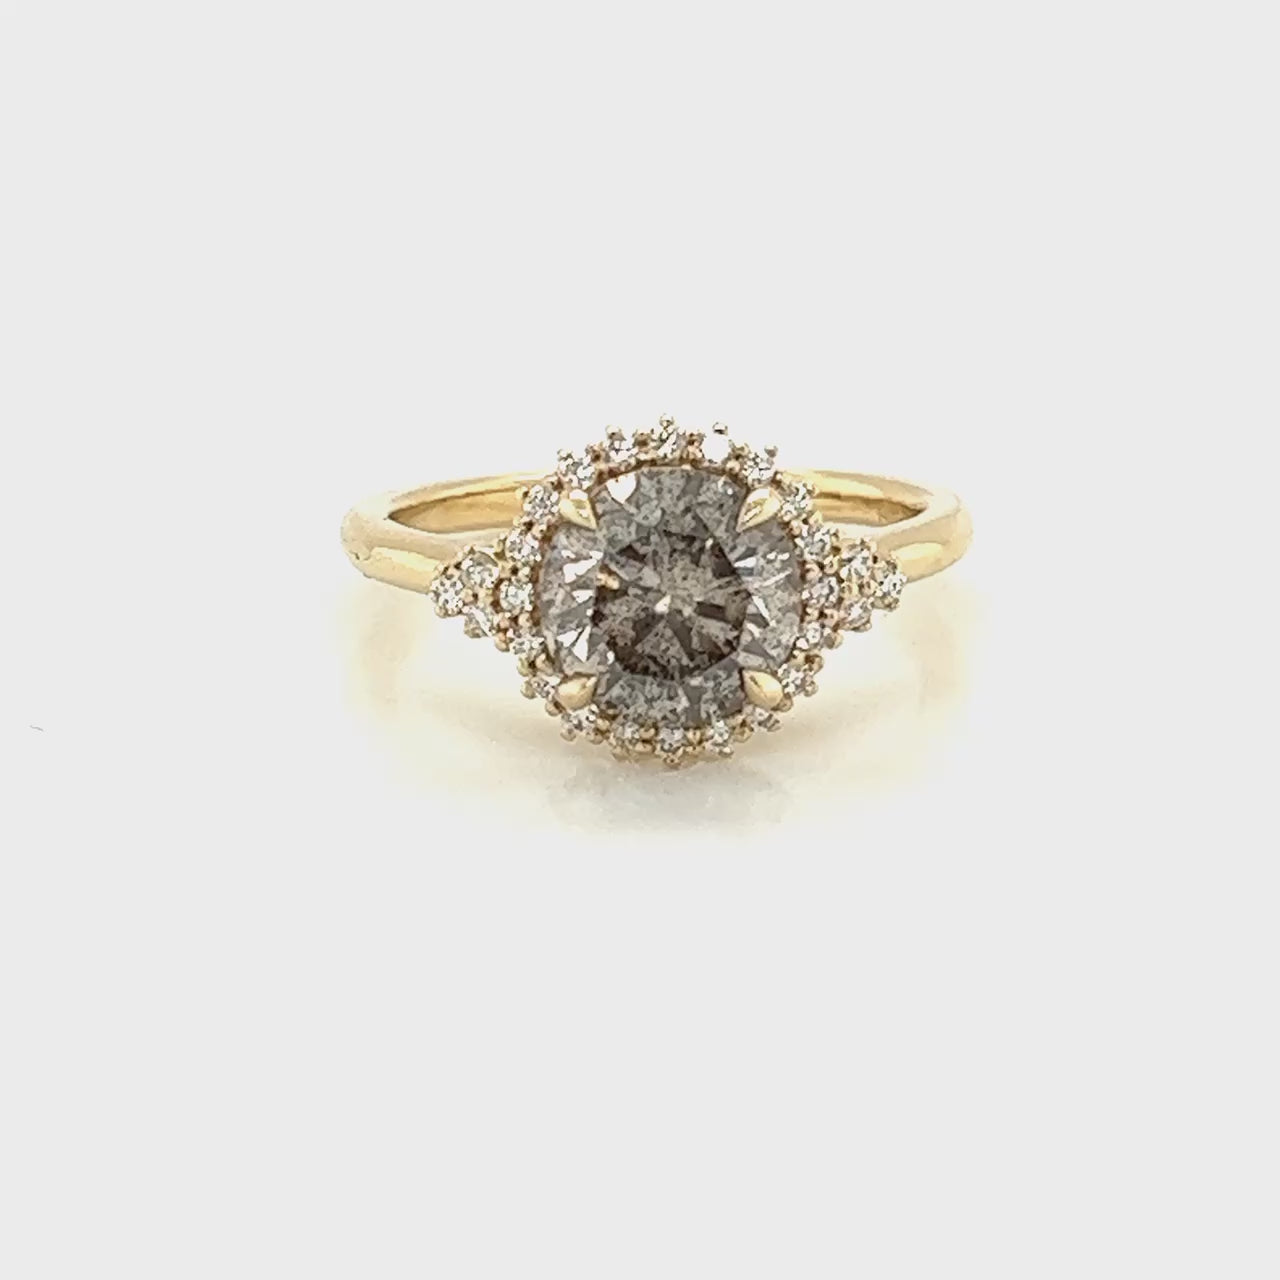 Nanette Ring with a 2.05 Carat Champagne Gray Round Celestial Diamond and White Accent Diamonds in 14k Yellow Gold - Ready to Size and Ship